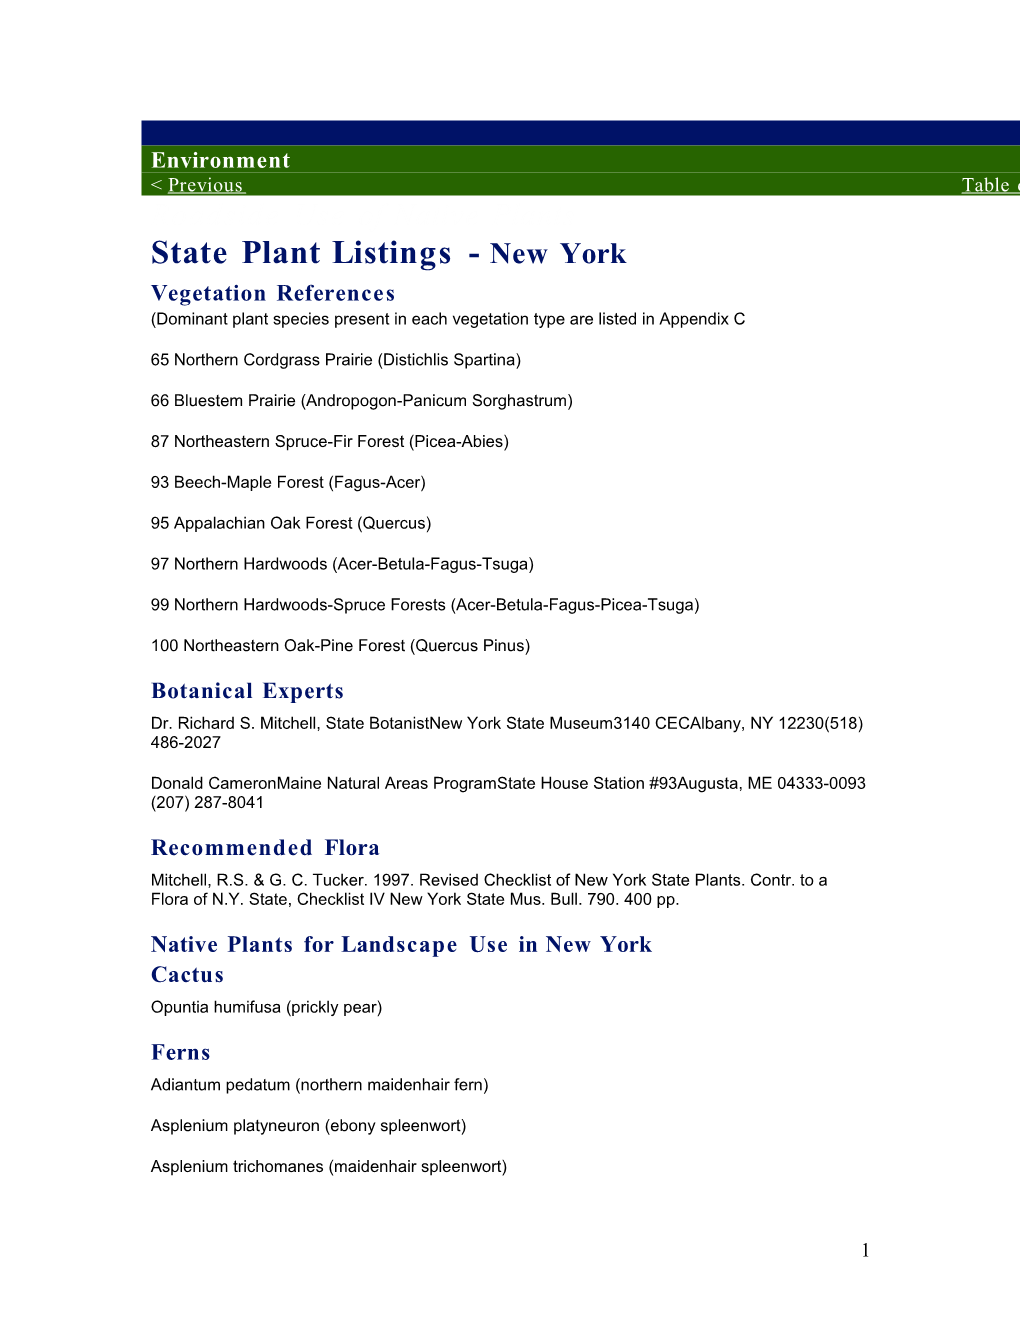 State Plant Listings - New York